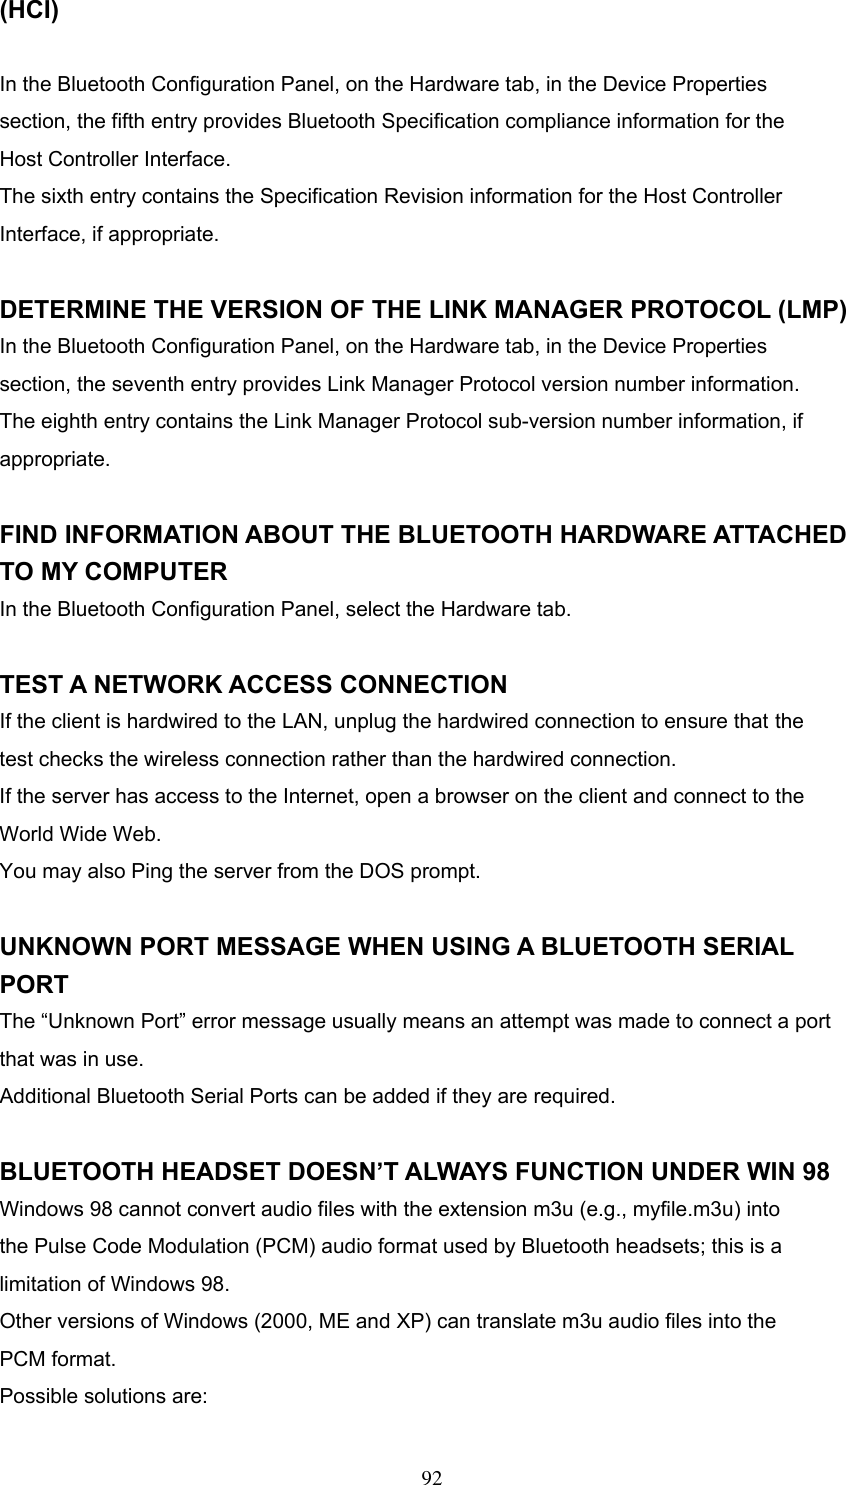 (HCI)  In the Bluetooth Configuration Panel, on the Hardware tab, in the Device Properties section, the fifth entry provides Bluetooth Specification compliance information for the Host Controller Interface. The sixth entry contains the Specification Revision information for the Host Controller Interface, if appropriate.  DETERMINE THE VERSION OF THE LINK MANAGER PROTOCOL (LMP) In the Bluetooth Configuration Panel, on the Hardware tab, in the Device Properties section, the seventh entry provides Link Manager Protocol version number information. The eighth entry contains the Link Manager Protocol sub-version number information, if appropriate.  FIND INFORMATION ABOUT THE BLUETOOTH HARDWARE ATTACHED TO MY COMPUTER In the Bluetooth Configuration Panel, select the Hardware tab.  TEST A NETWORK ACCESS CONNECTION If the client is hardwired to the LAN, unplug the hardwired connection to ensure that the test checks the wireless connection rather than the hardwired connection. If the server has access to the Internet, open a browser on the client and connect to the World Wide Web. You may also Ping the server from the DOS prompt.  UNKNOWN PORT MESSAGE WHEN USING A BLUETOOTH SERIAL PORT The “Unknown Port” error message usually means an attempt was made to connect a port that was in use. Additional Bluetooth Serial Ports can be added if they are required.  BLUETOOTH HEADSET DOESN’T ALWAYS FUNCTION UNDER WIN 98 Windows 98 cannot convert audio files with the extension m3u (e.g., myfile.m3u) into the Pulse Code Modulation (PCM) audio format used by Bluetooth headsets; this is a limitation of Windows 98. Other versions of Windows (2000, ME and XP) can translate m3u audio files into the PCM format. Possible solutions are:  92 